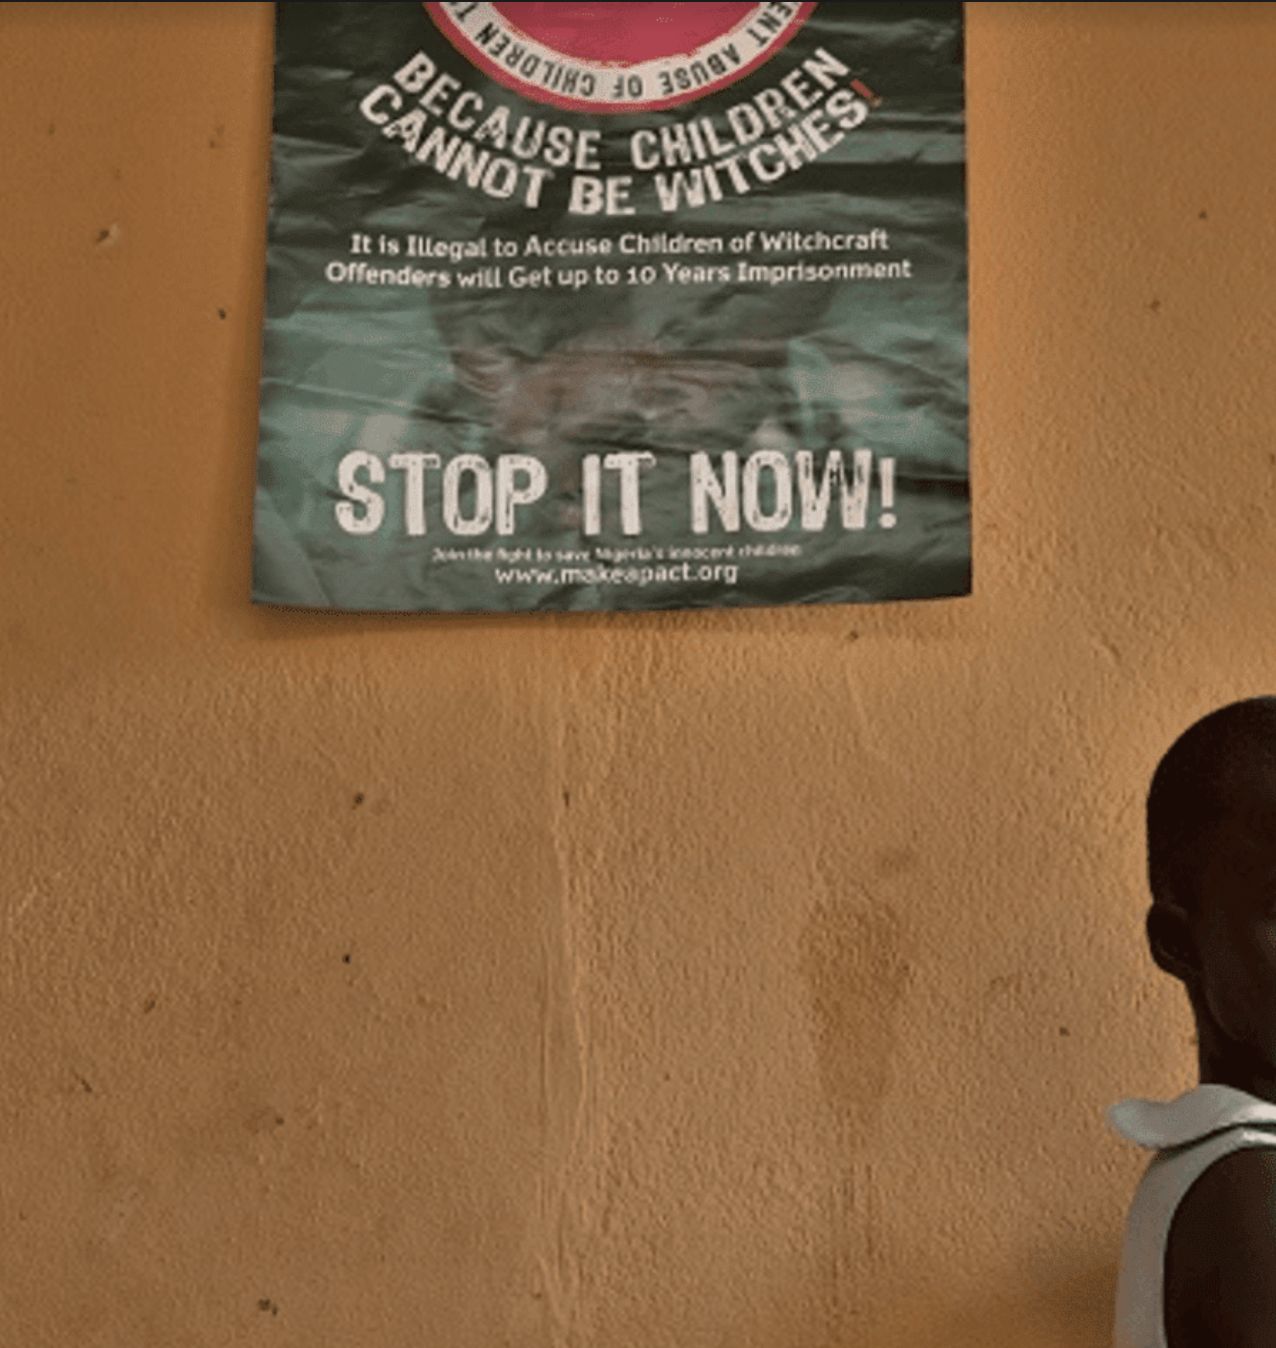 An information campaign in Nigeria photographed by Witchcraft and Human Rights Network executive director Gary Foxcroft while he worked there